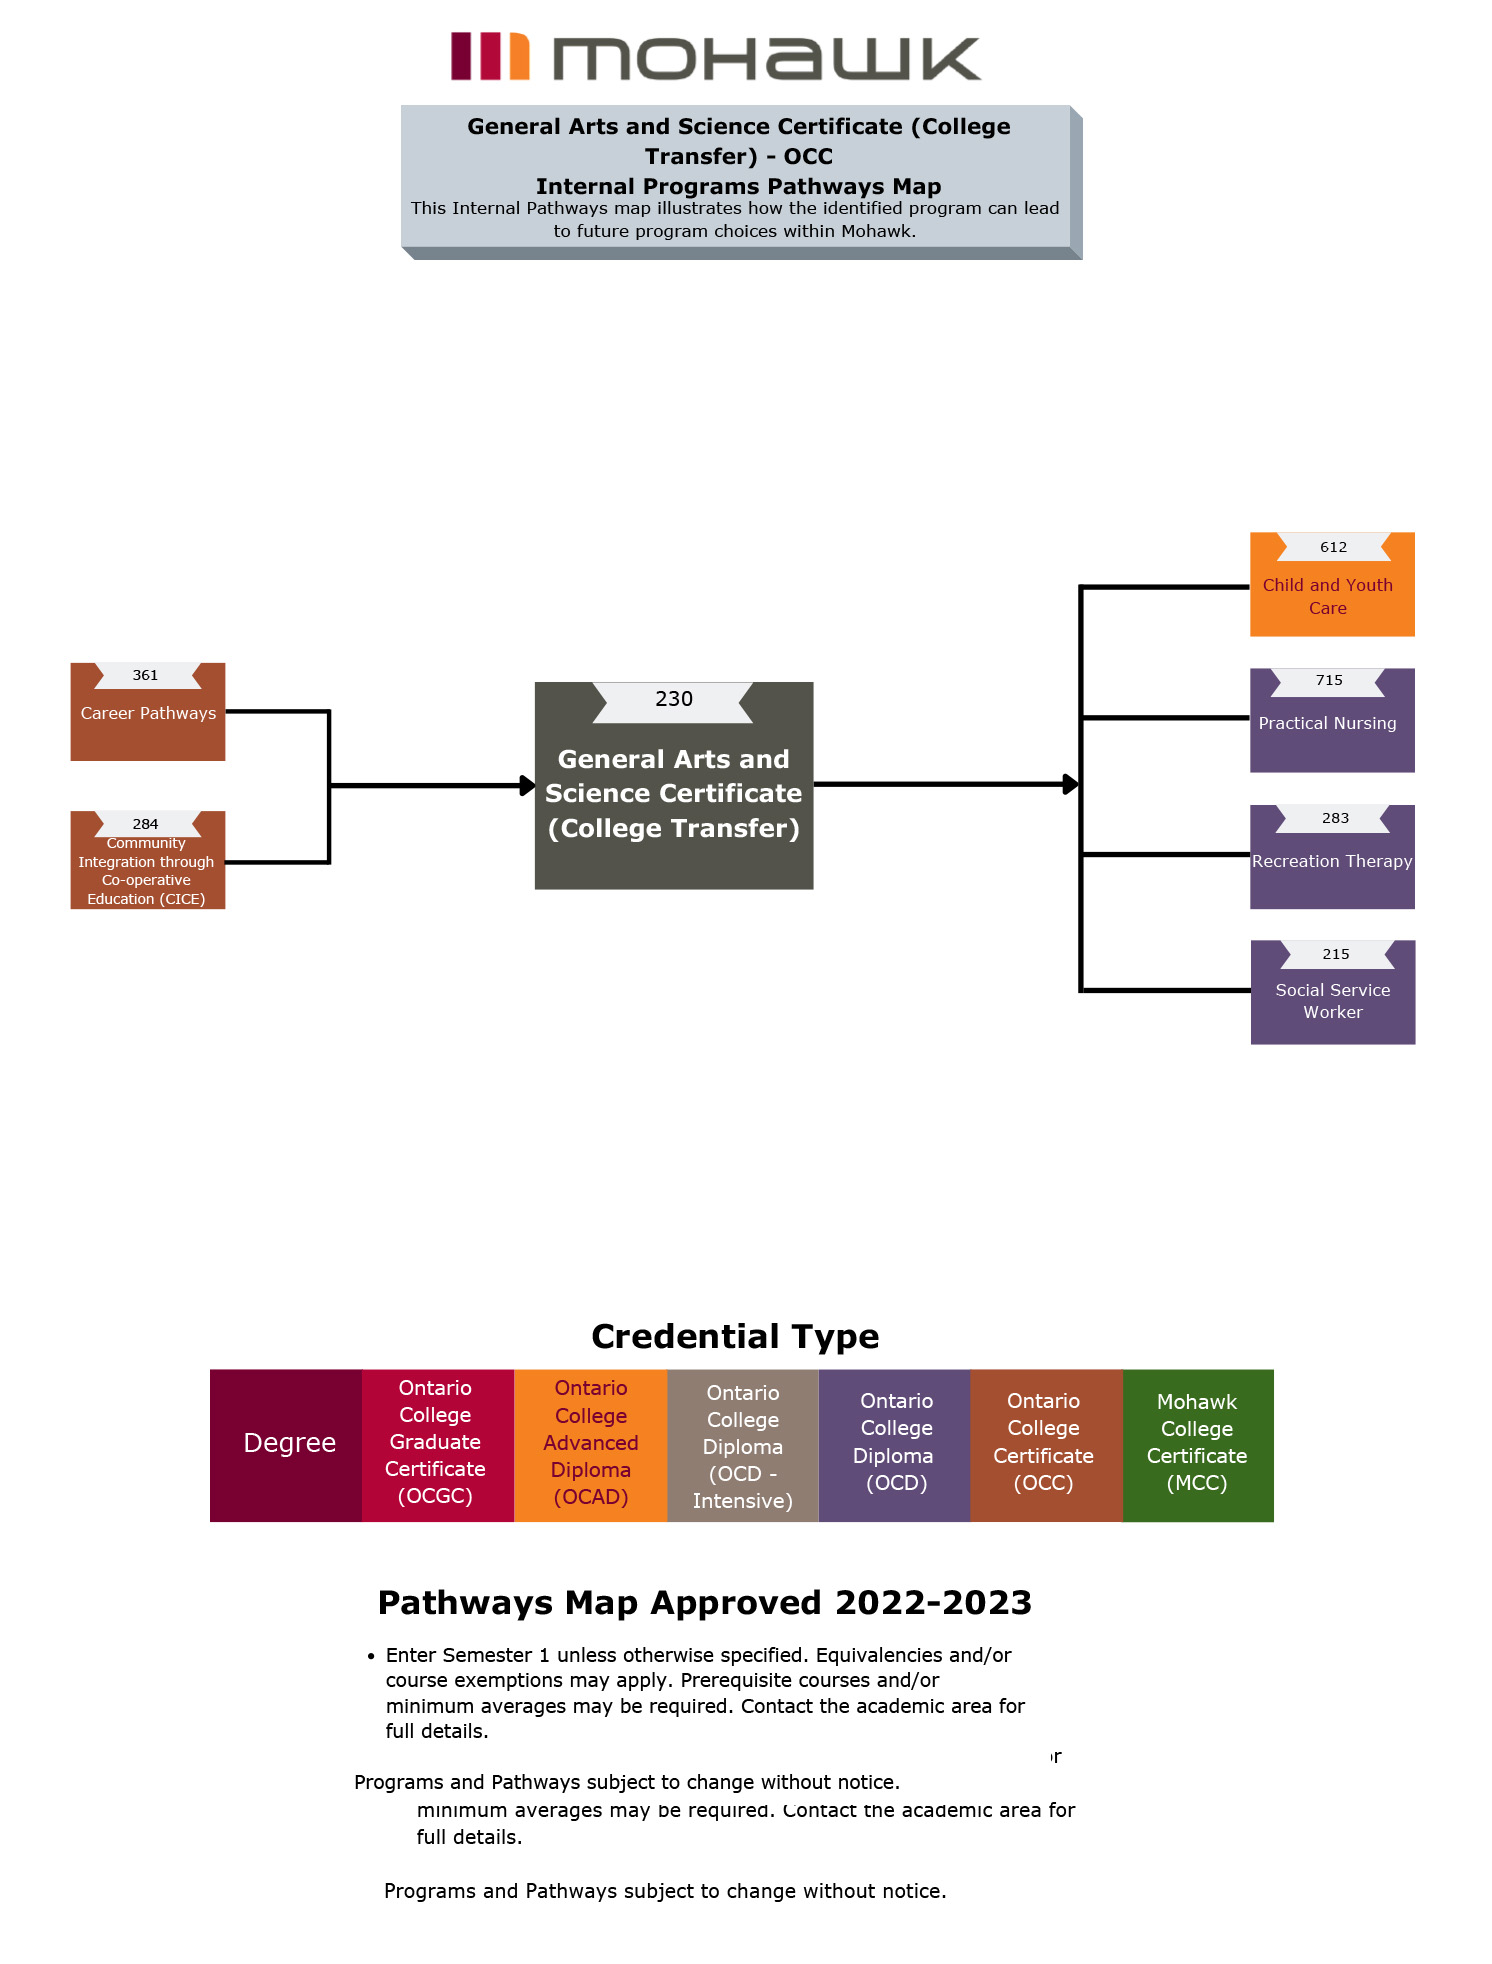 general arts and sciences college transfer pathways map